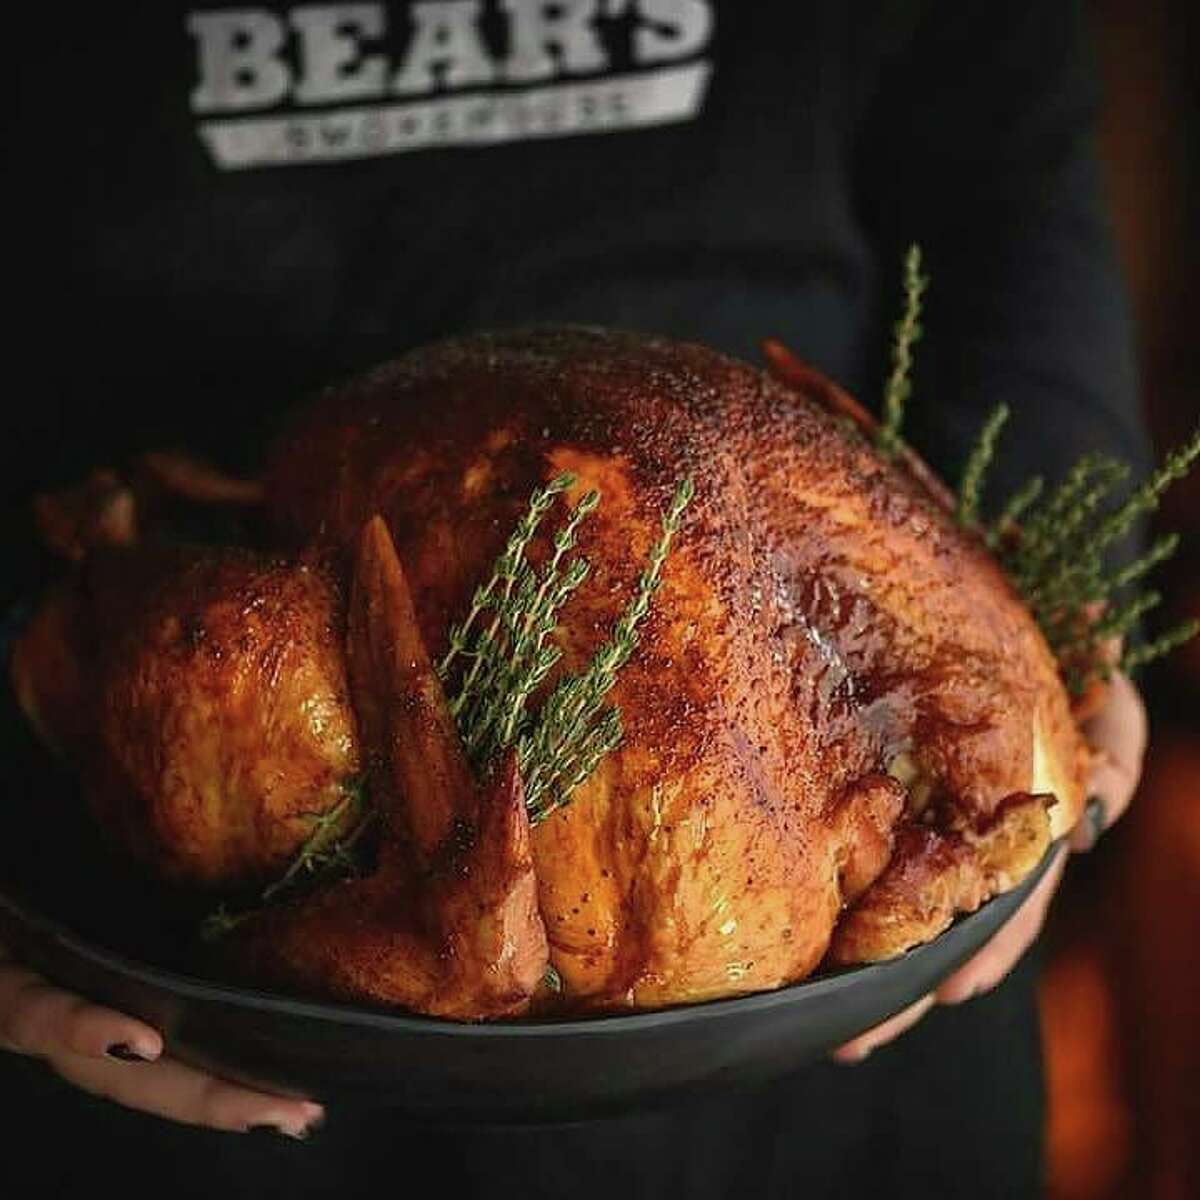 Bear's Smokehouse has a Thanksgiving take-out menu with extensive options for meats, salads, sides, stuffings and breads, sauces and gravies, and desserts.